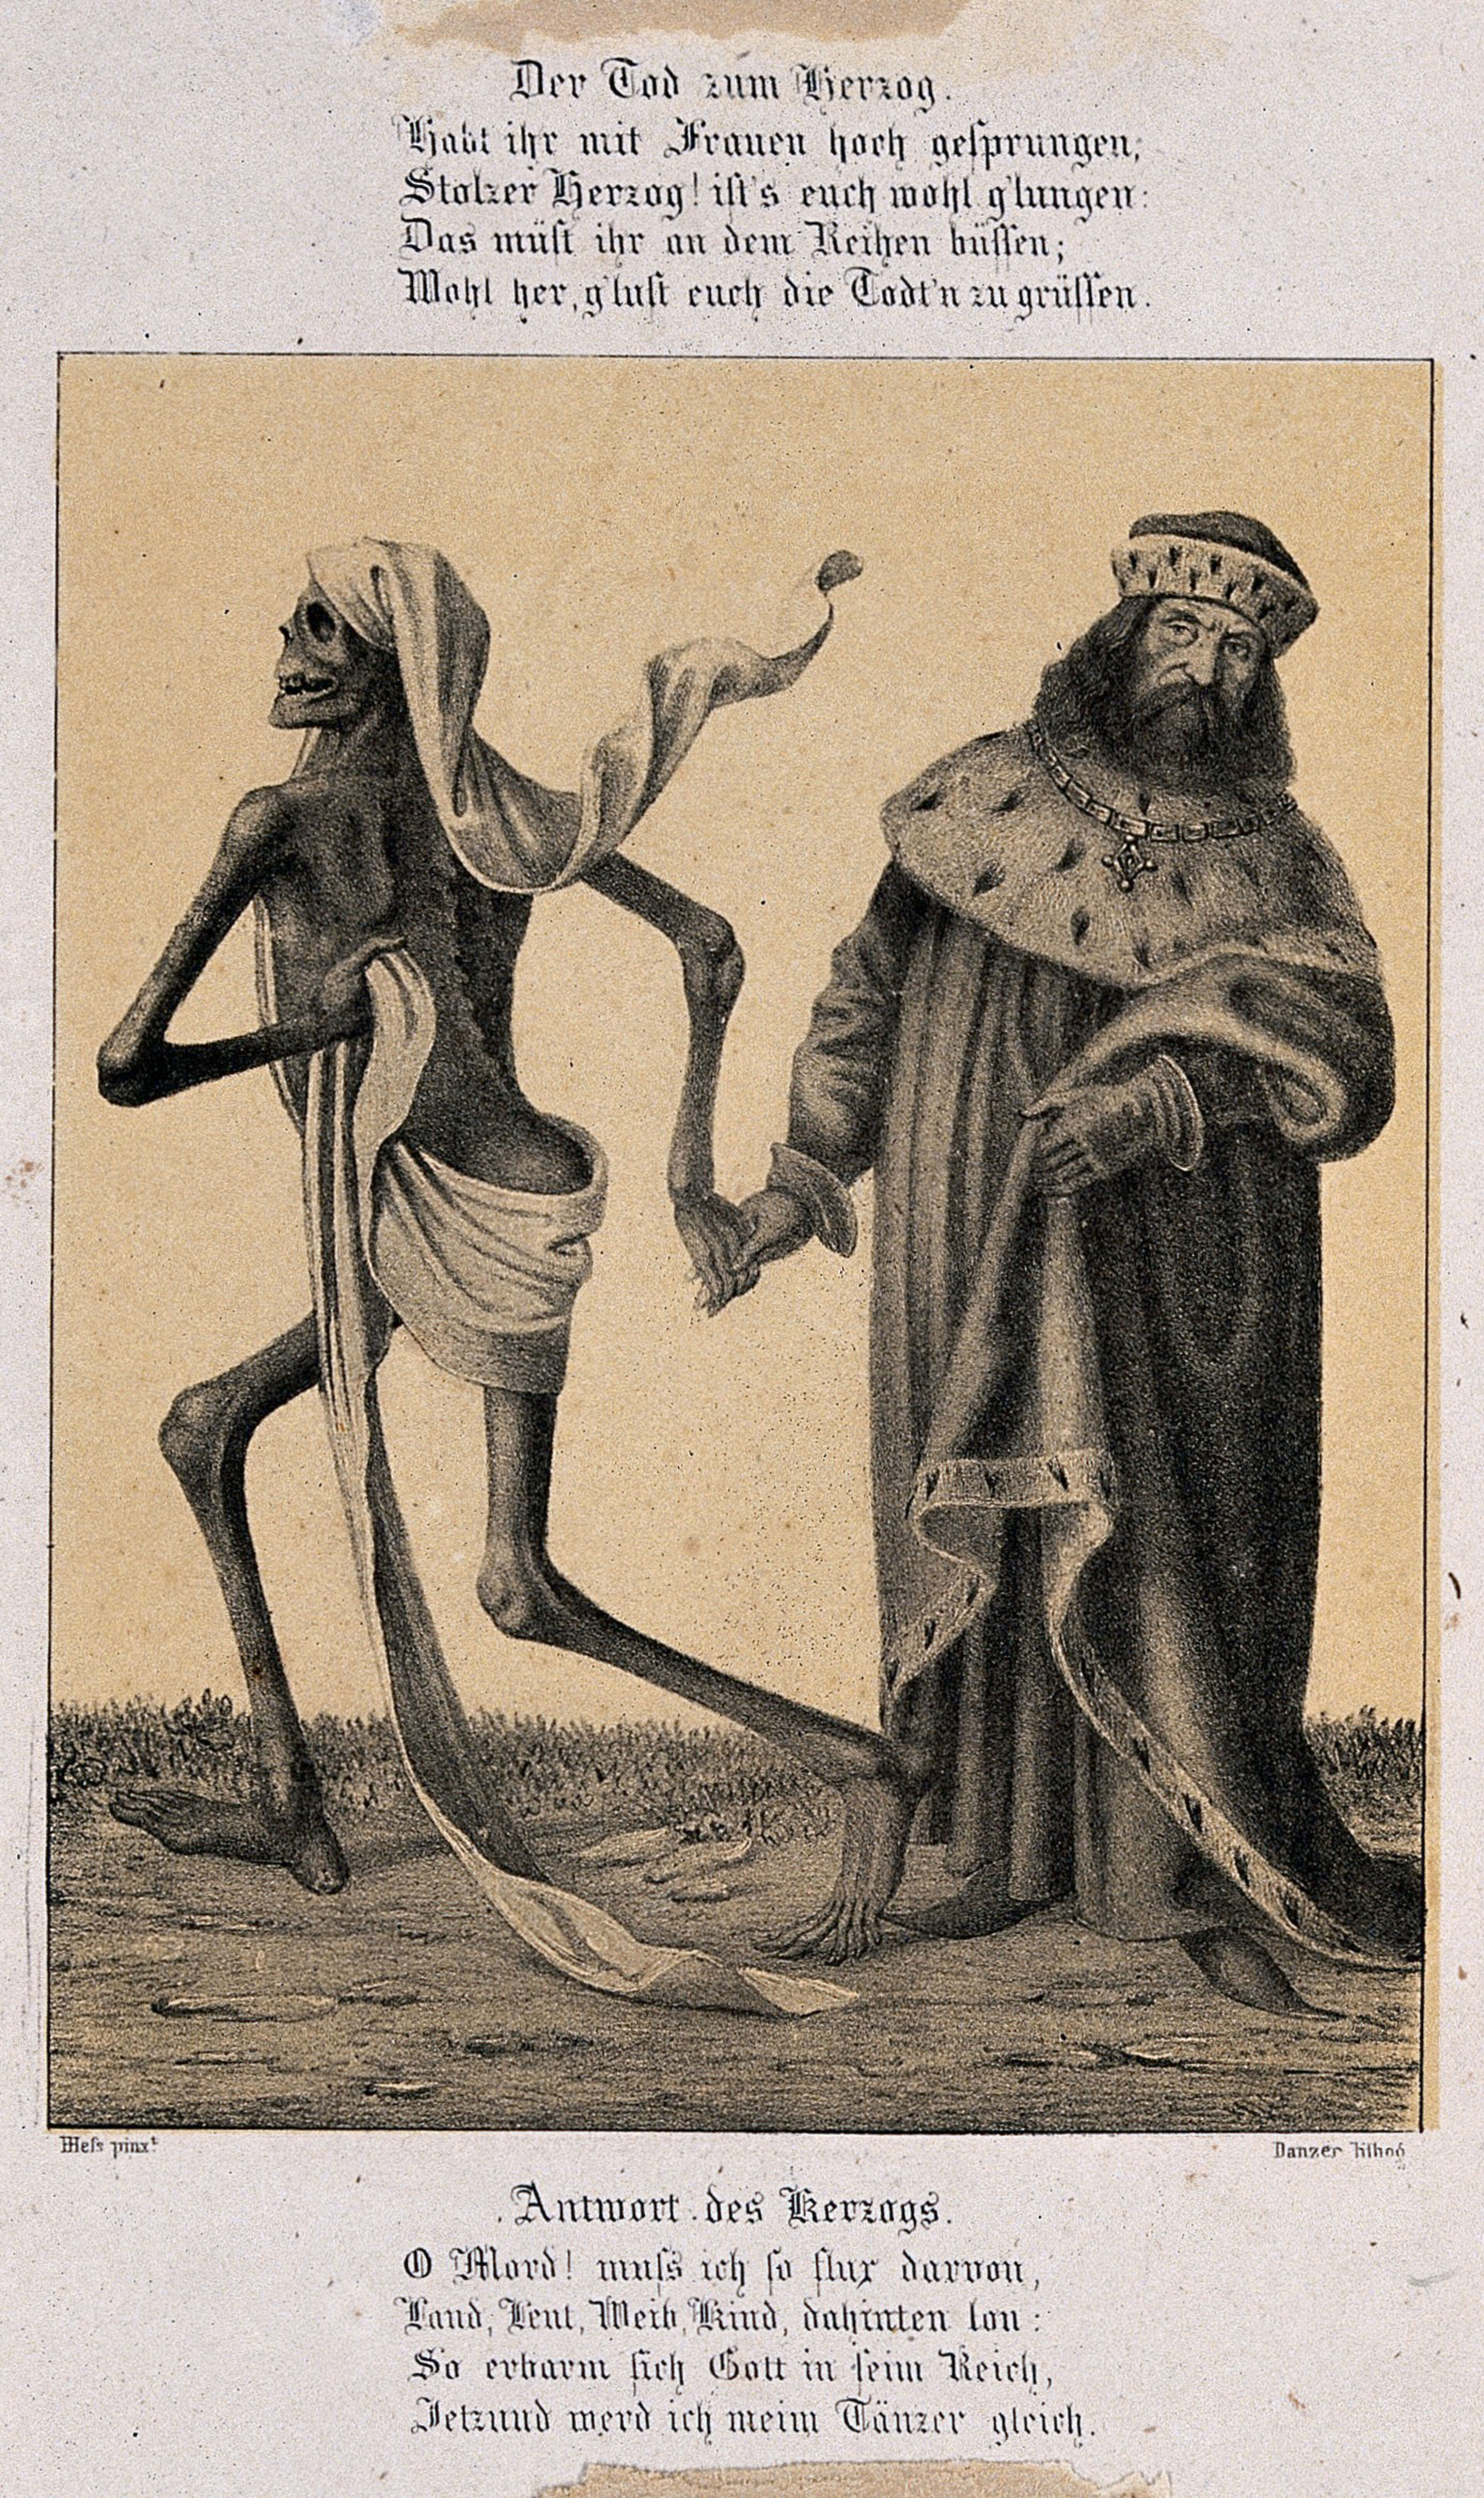 The dance of death at Basel: death and the duke. Lithograph by Danzer after H. Hess.